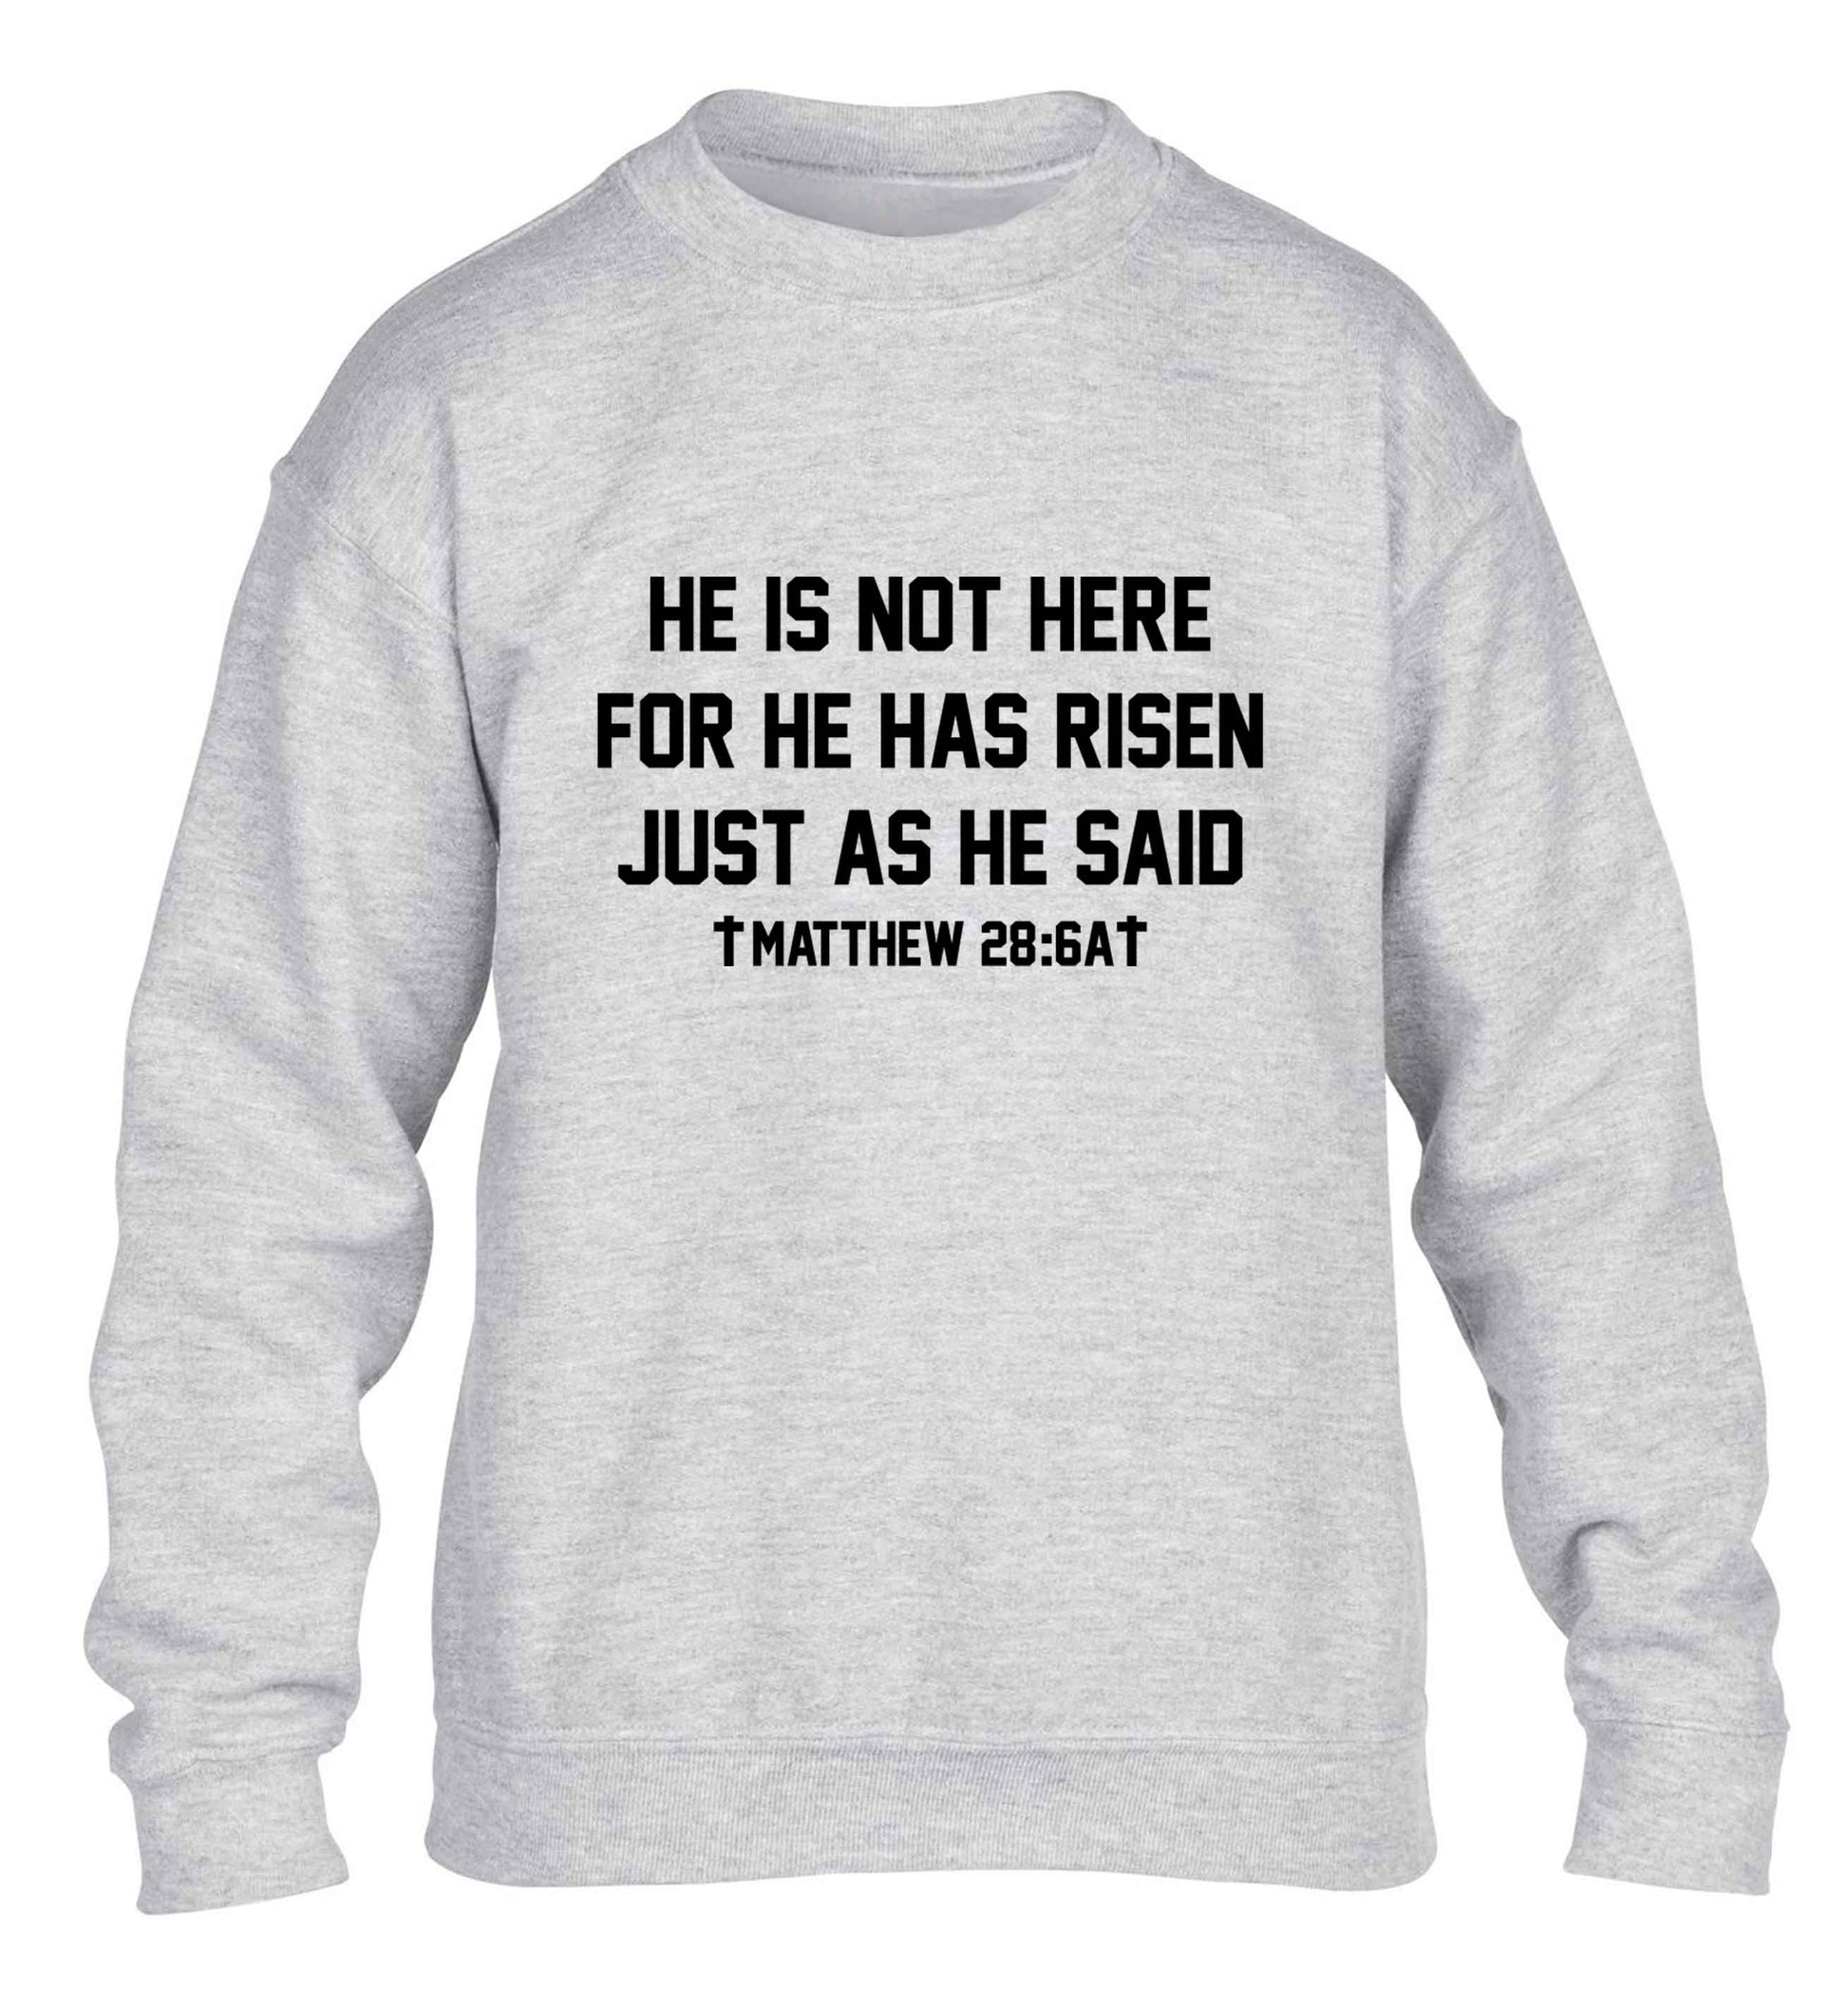 He is not here for he has risen just as he said matthew 28:6A children's grey sweater 12-13 Years